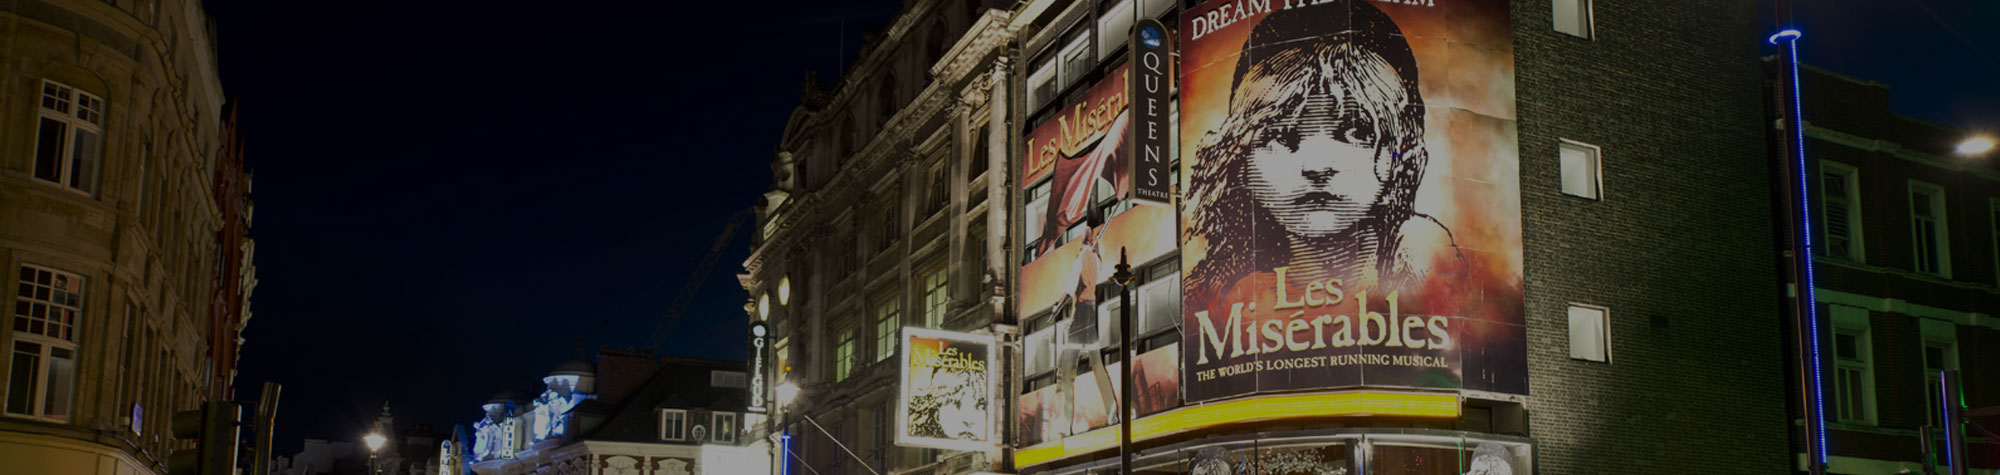 The Best Deals on Broadway and West End Theater Tickets